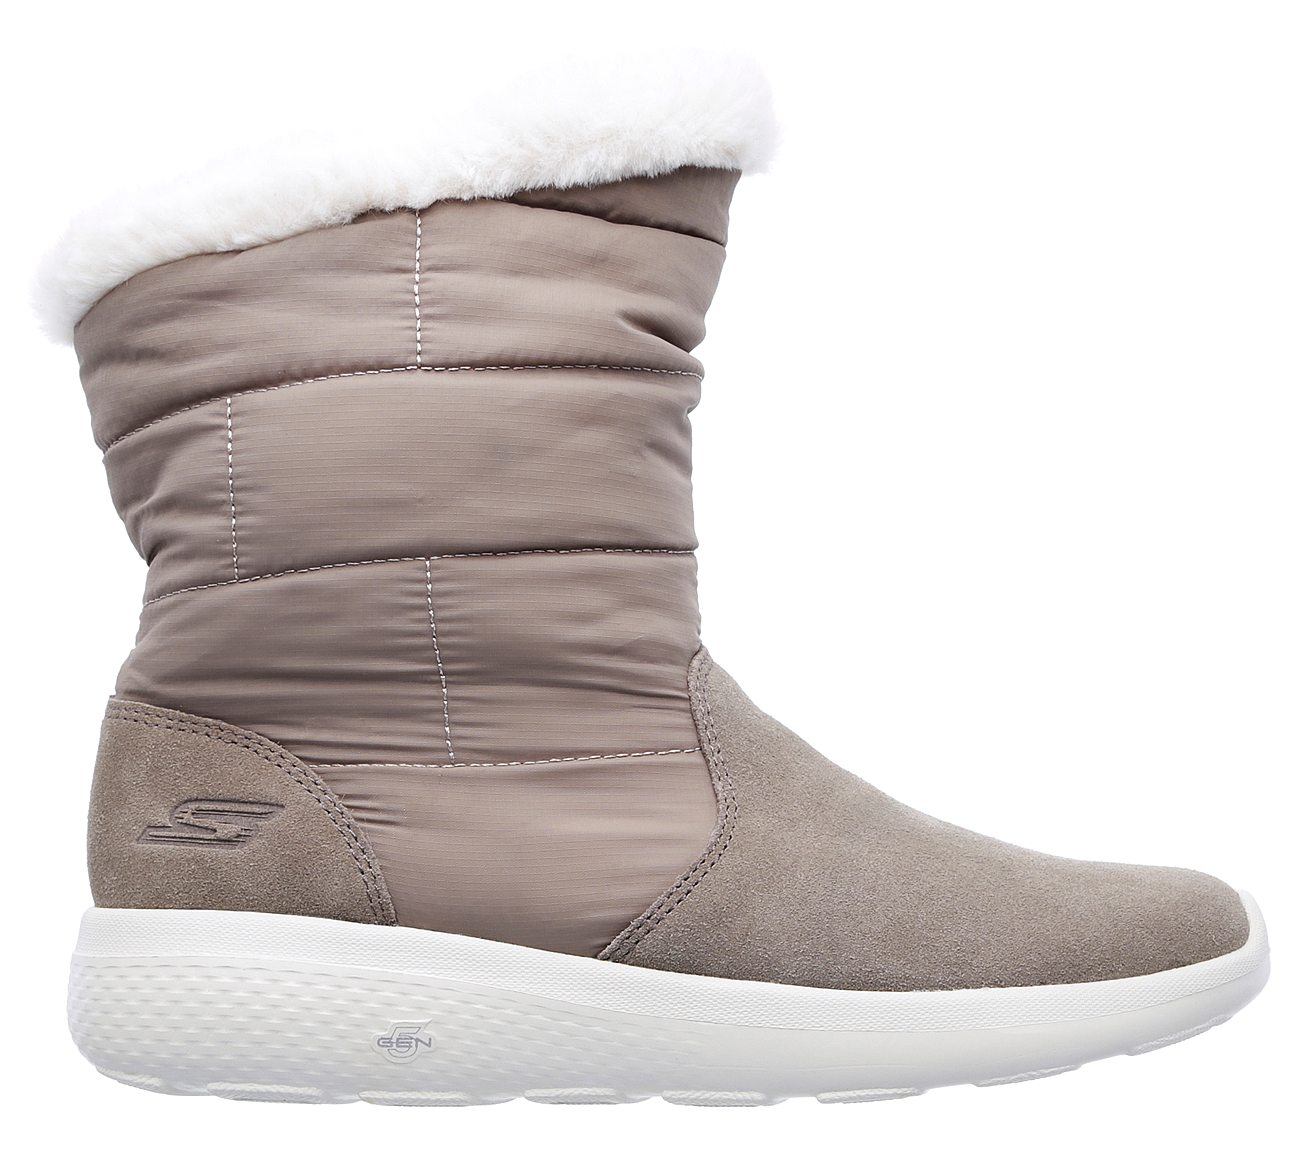 city 2 suede mid calf boot 